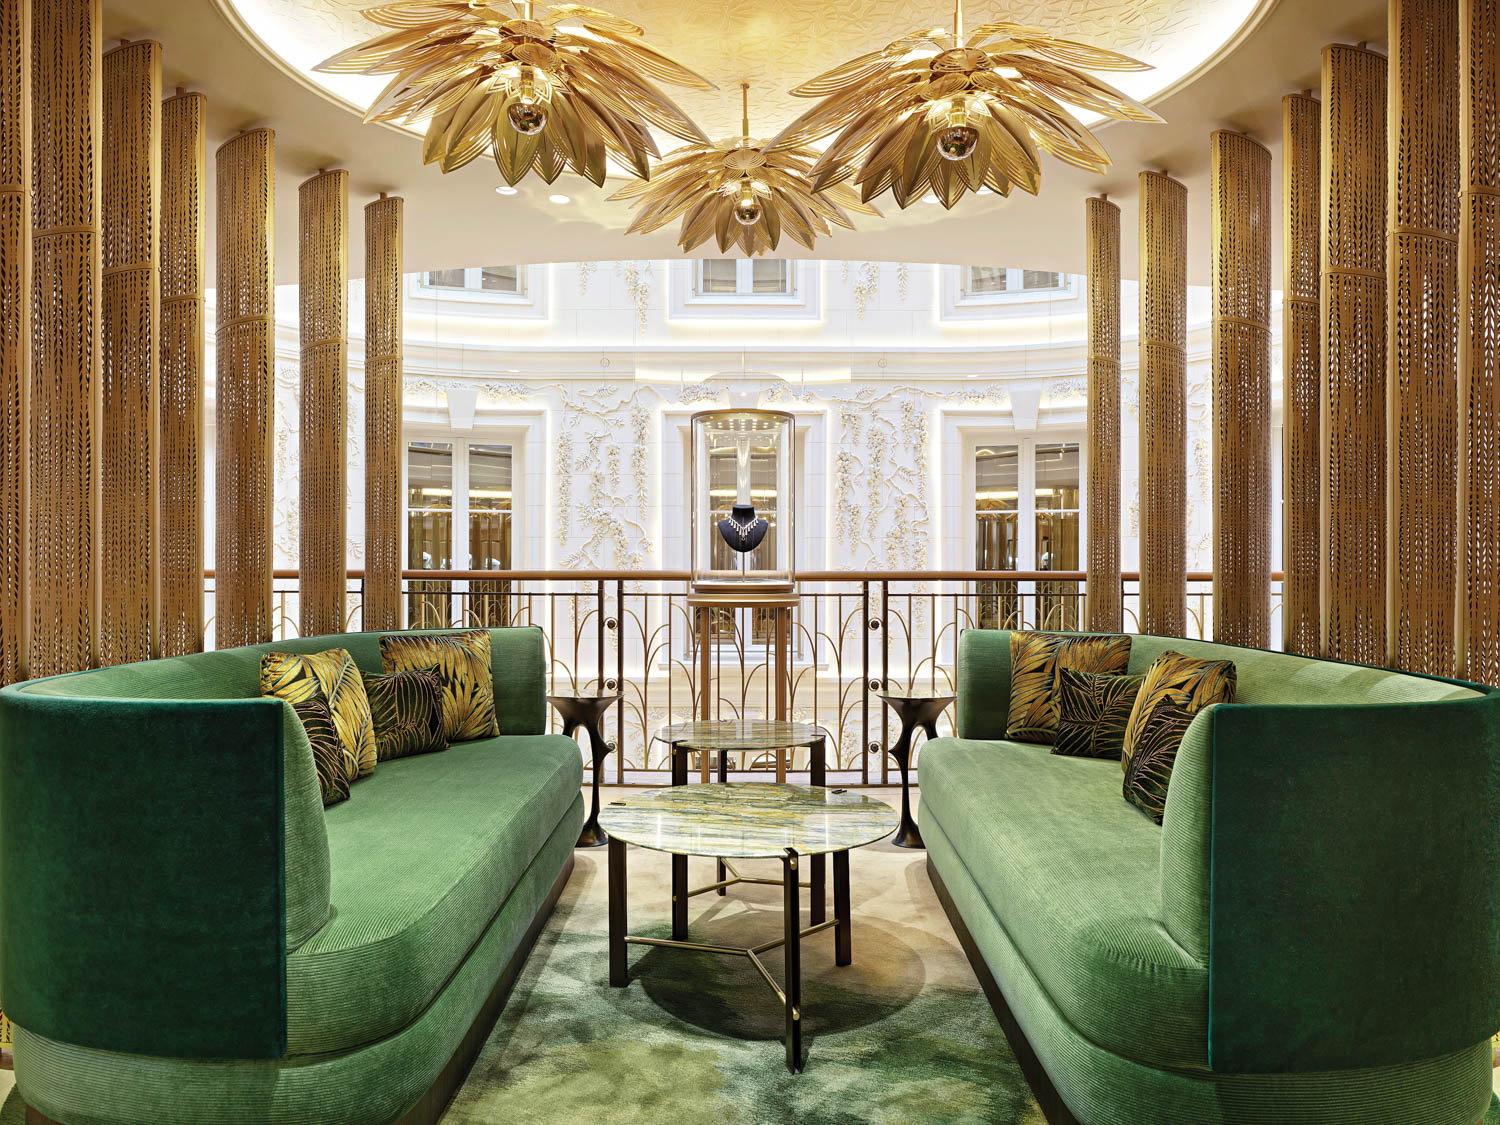 green sofas under a leaf-like gold chandeliers